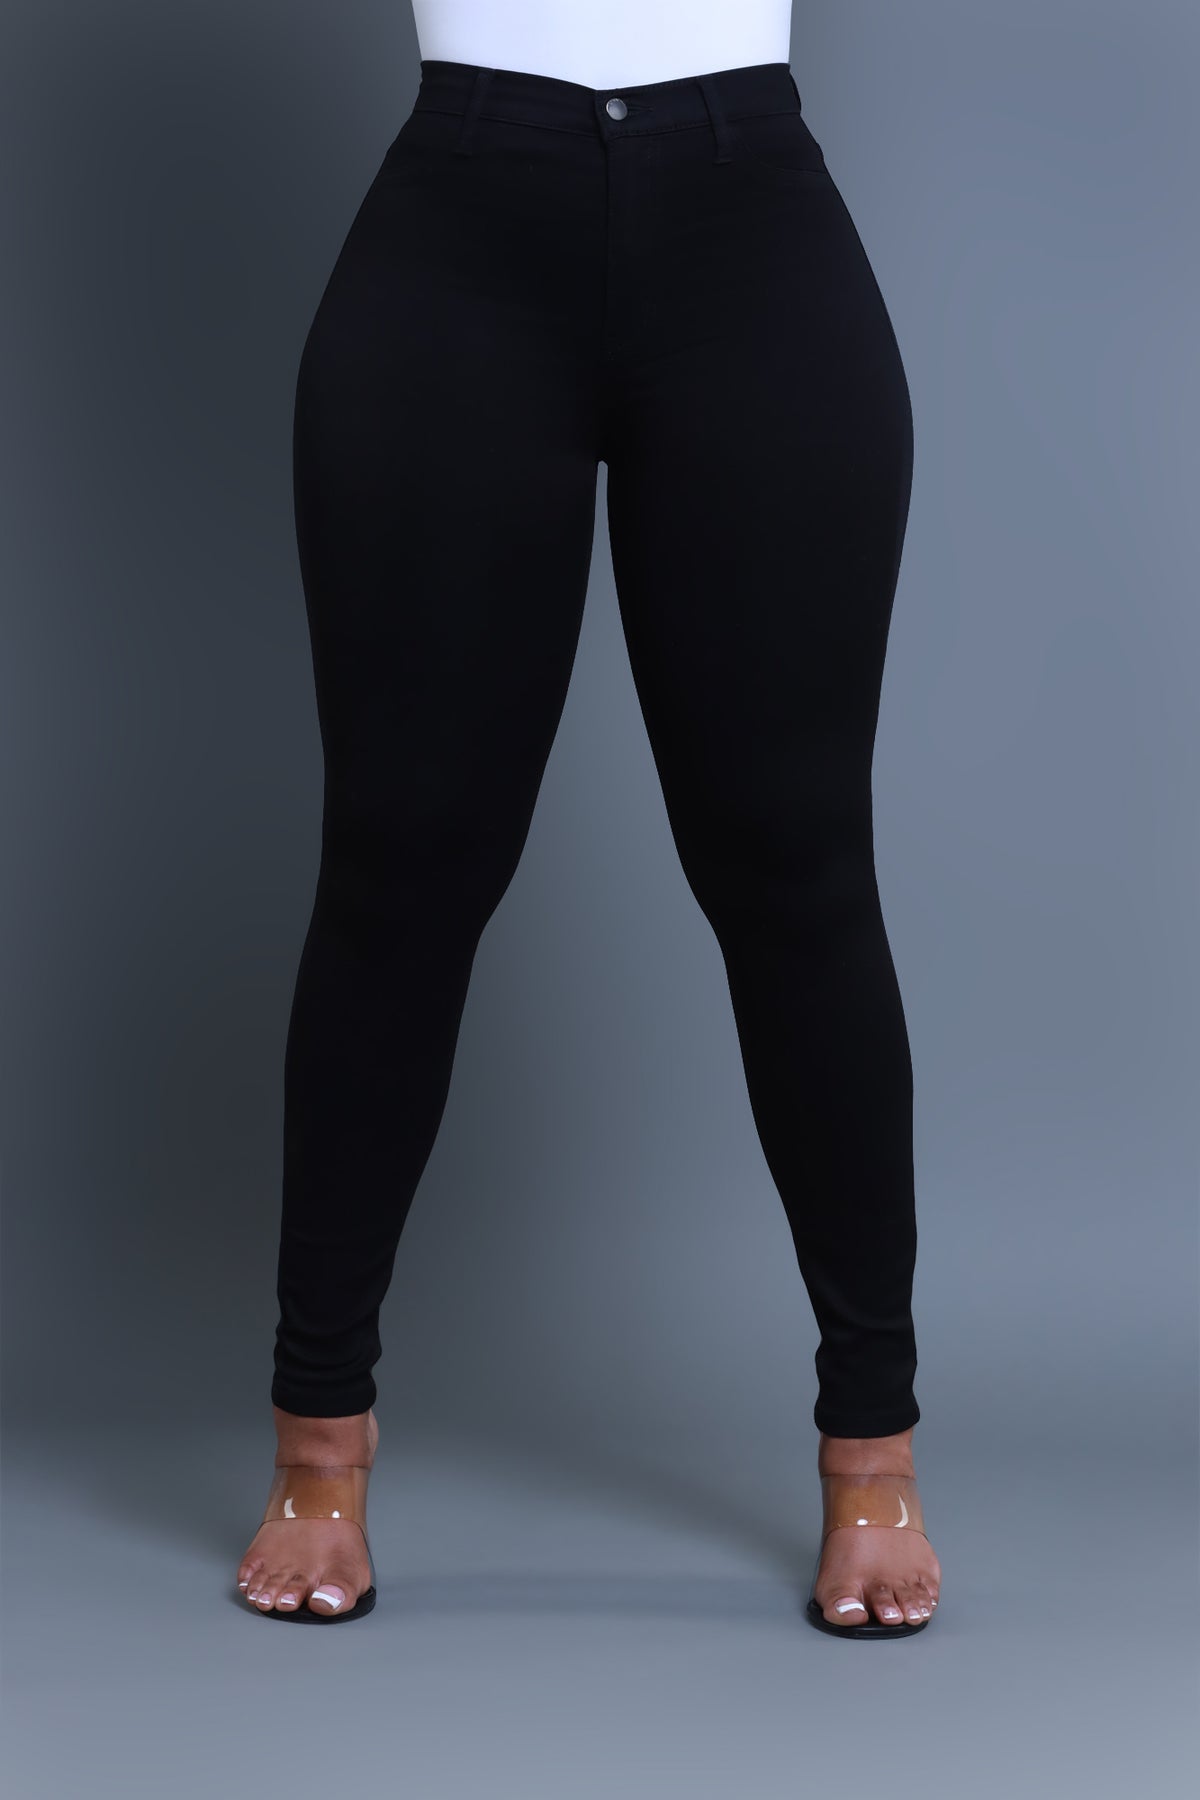 
              Look Back Butt Lifting High Rise Jeans - Black - Swank A Posh
            